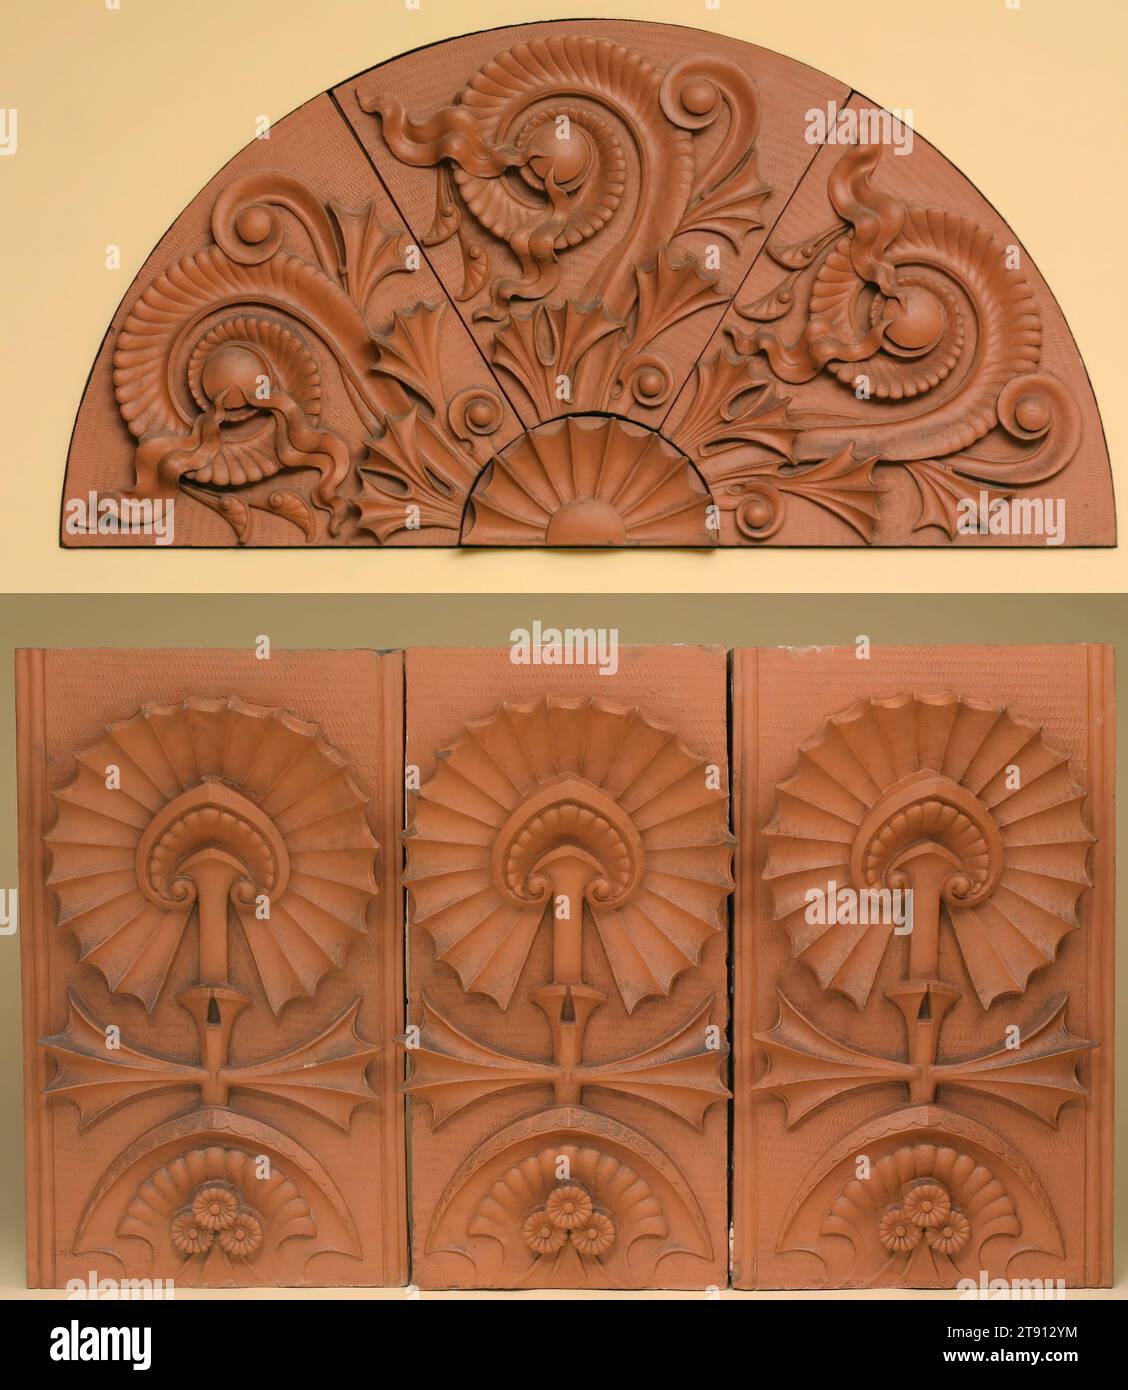 Lunette, 1884-1885, Louis Henri Sullivan; Maker: Northwestern Terra Cotta Works (a.k.a. Norweta), American, 1856-1924, Terracotta, United States, Chicago Style, Louis Sullivan designed these terracotta panels for the exterior of the Scoville Building in Chicago, one of the Adler and Sullivan firm's earliest commissions. It required them to remodel an existing Adler structure to accord with a new, much larger addition. The terracotta pieces shown here formed part of the organic decoration of stylized plants with which Sullivan tied the two buildings together. This lunette ornamented the arch Stock Photo